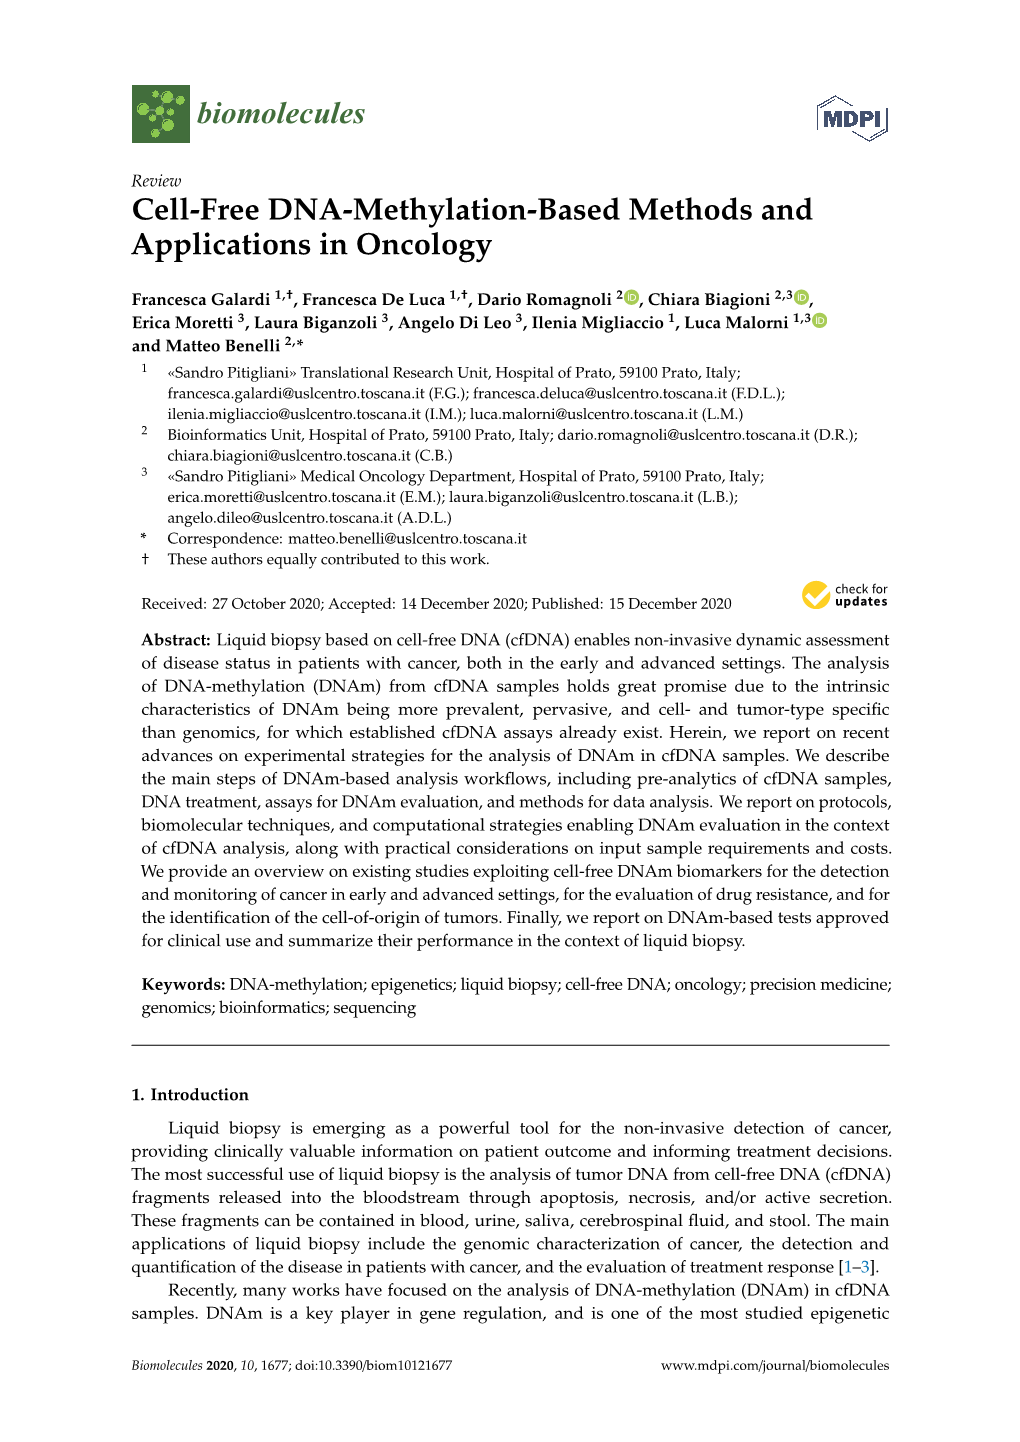 Cell-Free DNA-Methylation-Based Methods and Applications in Oncology